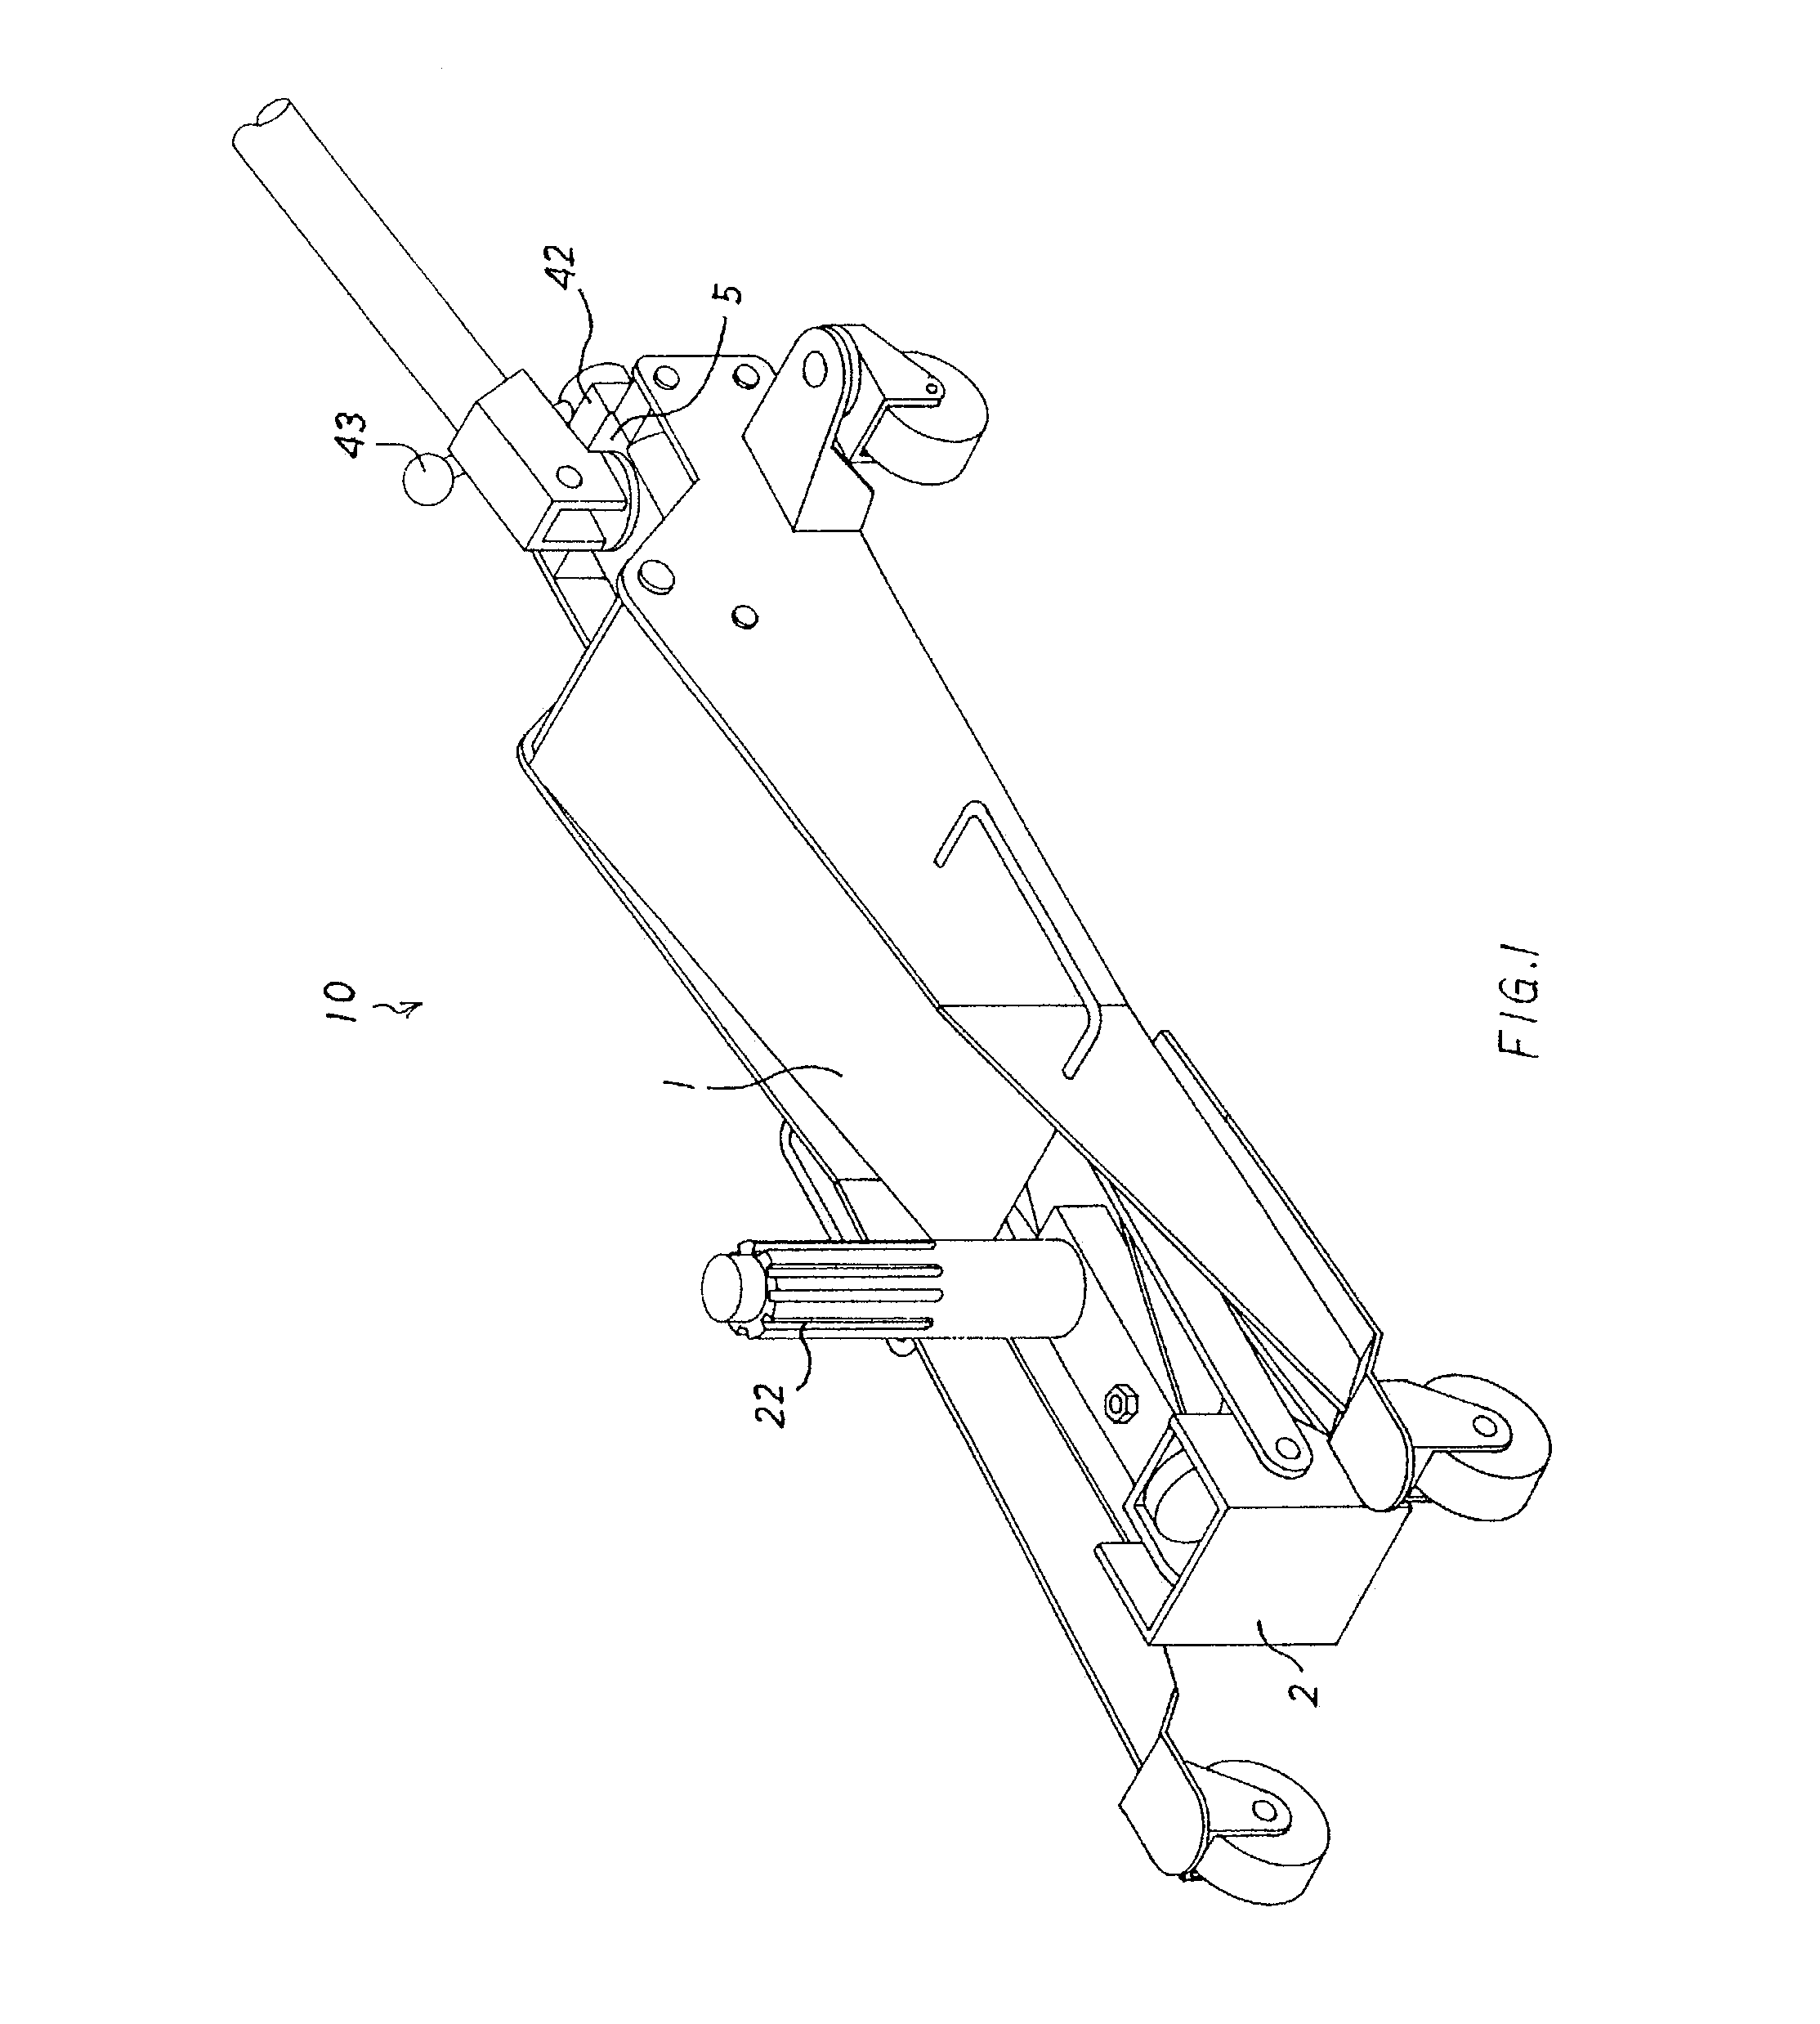 Jack structure for a clutch